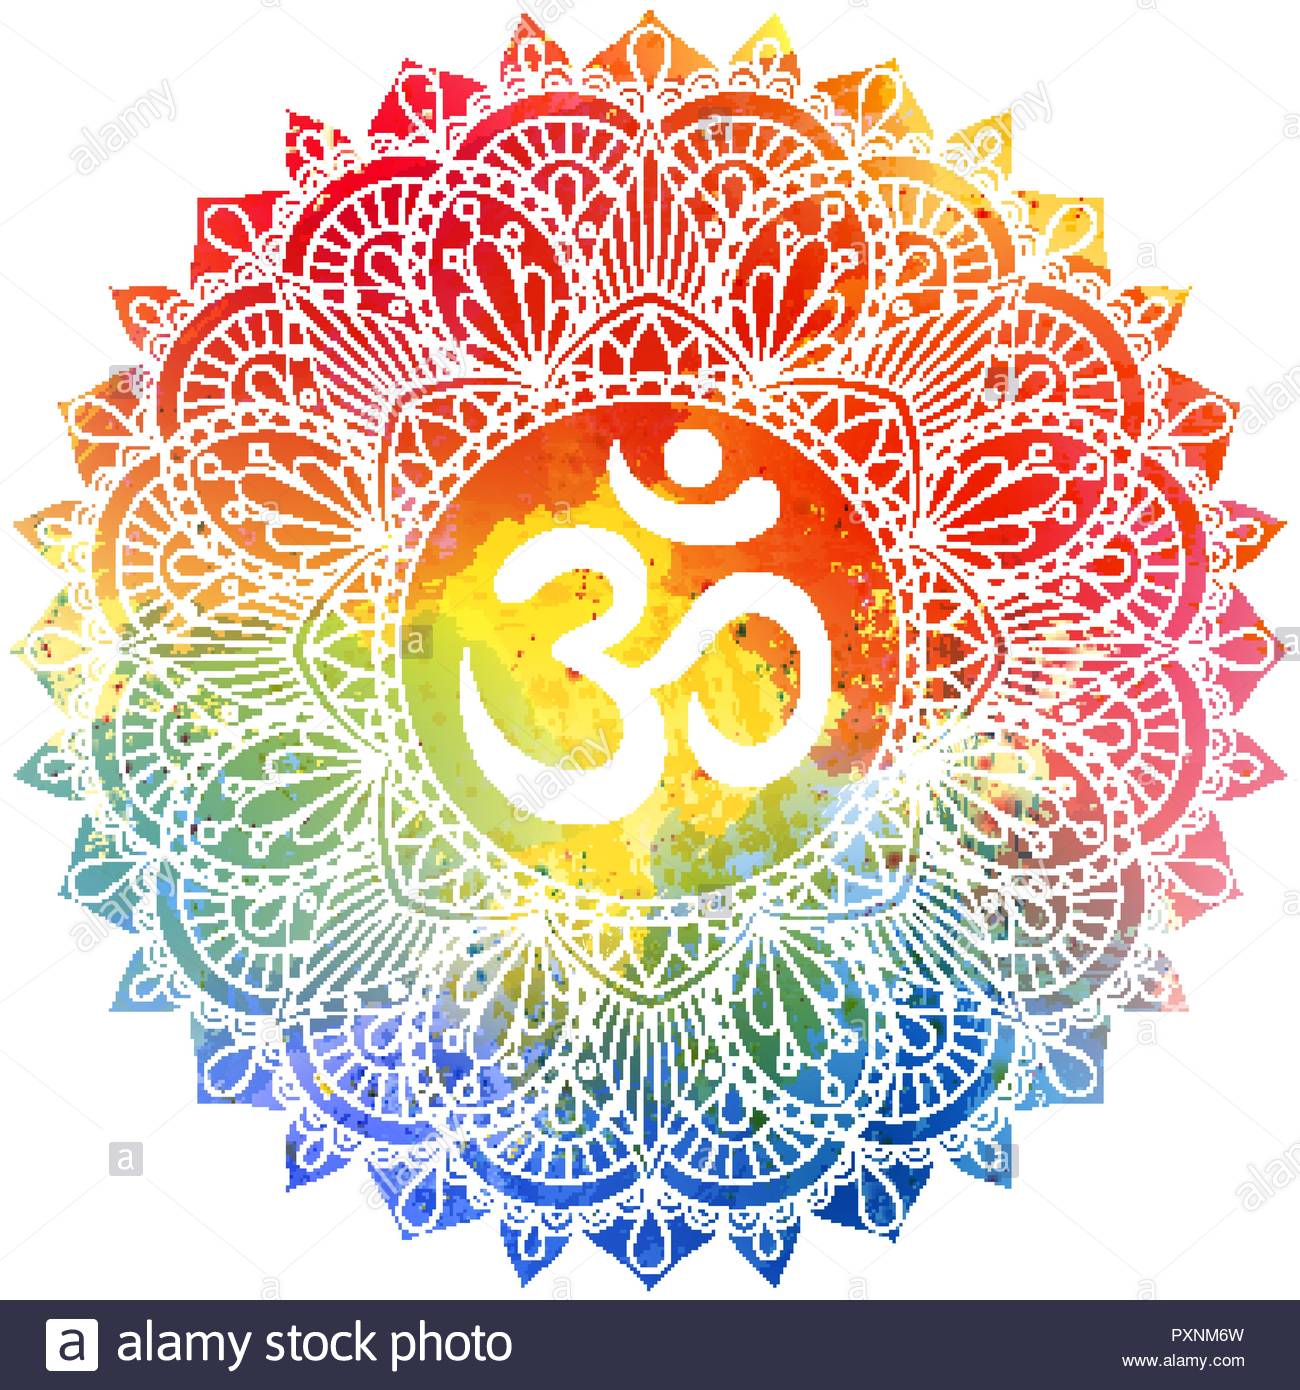 Mandala Ornament With Om Symbol Over Colorful Watercolor